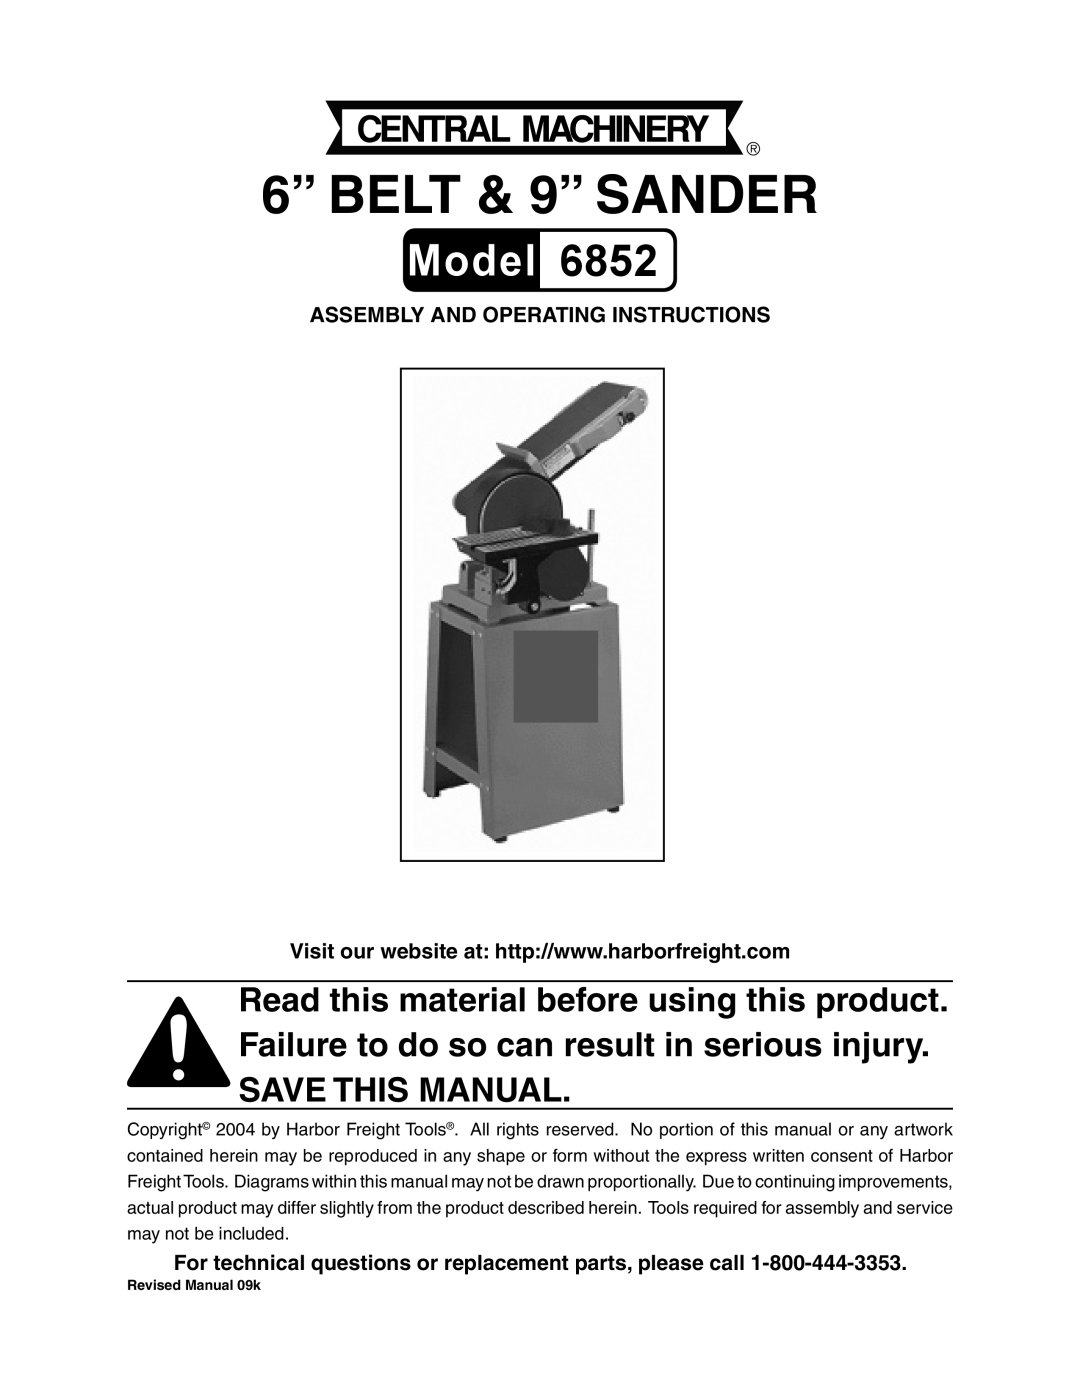 Harbor Freight Tools 6852 operating instructions Assembly And Operating Instructions, 6” BELT & 9” SANDER 